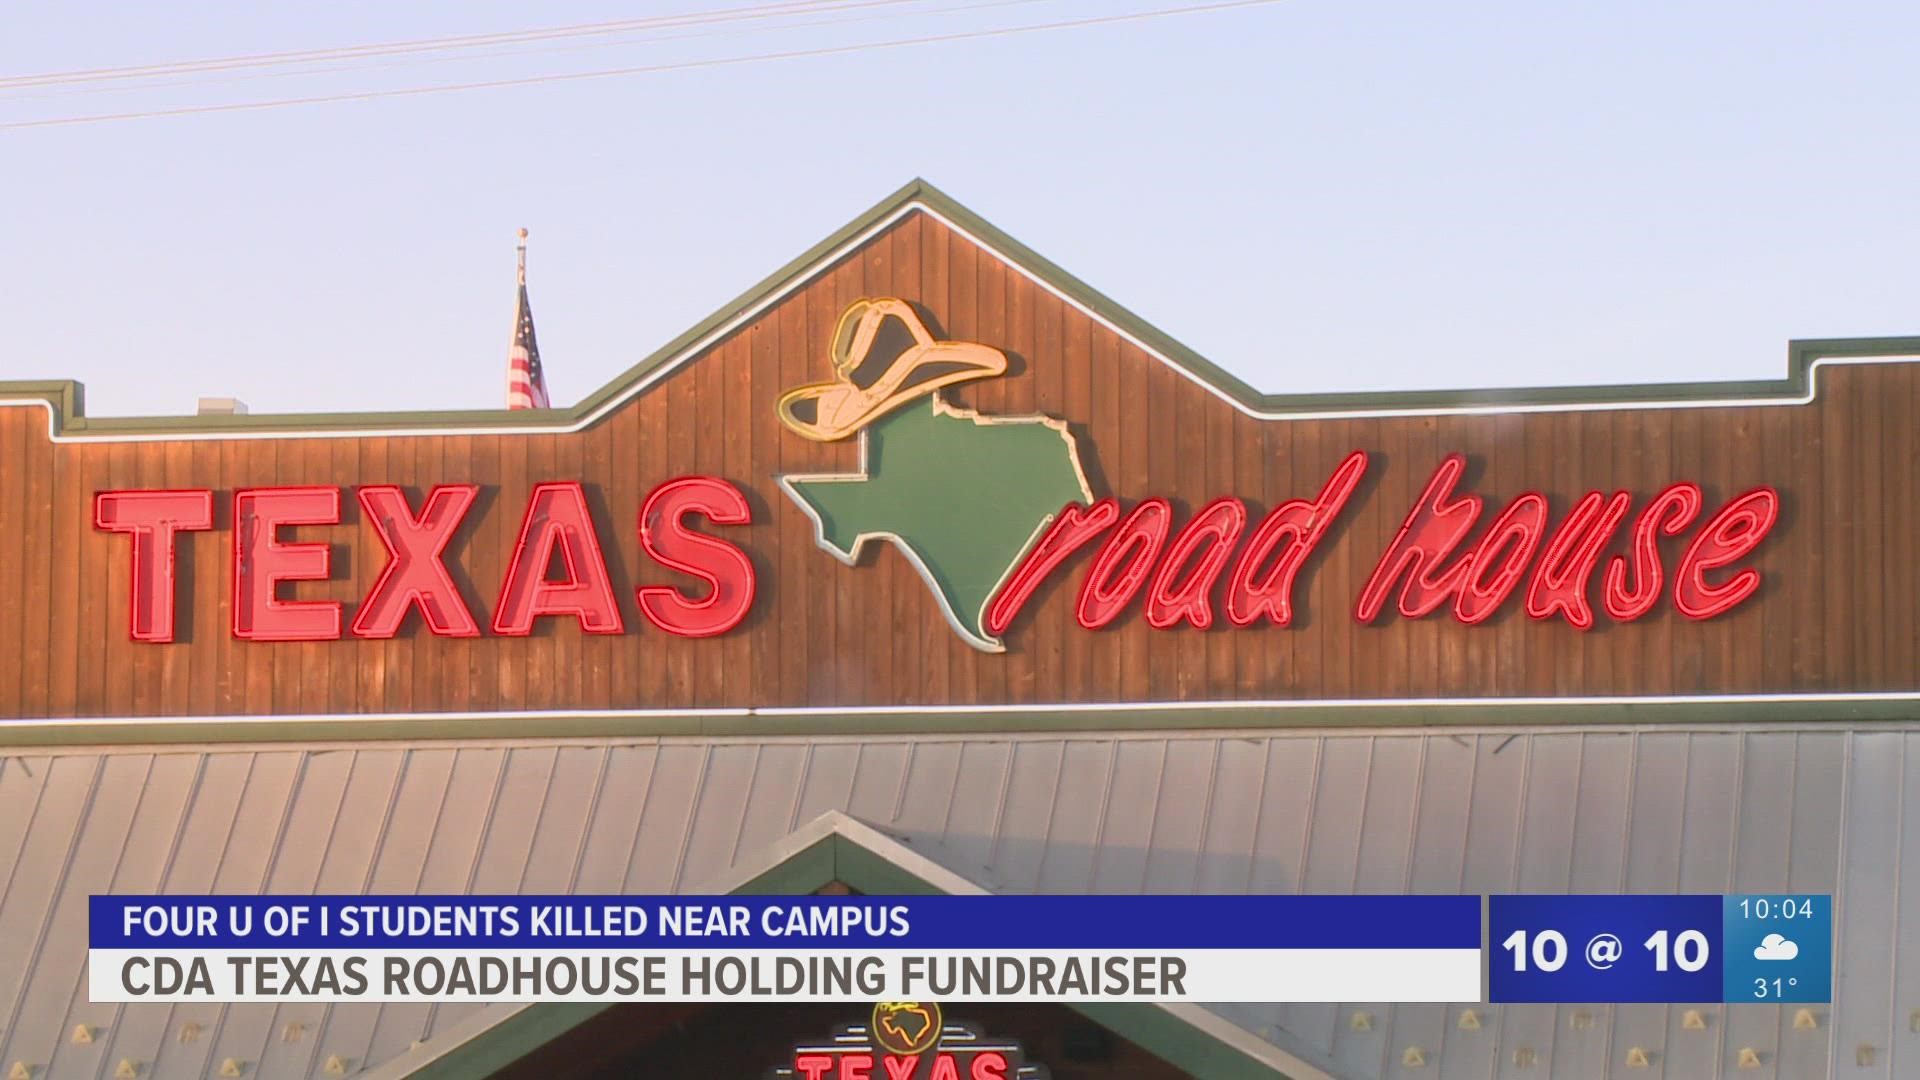 Xana Kernodle worked at Texas Roadhouse before she attended the University of Idaho. The restaurant will raise money for the families of the four students on Monday.